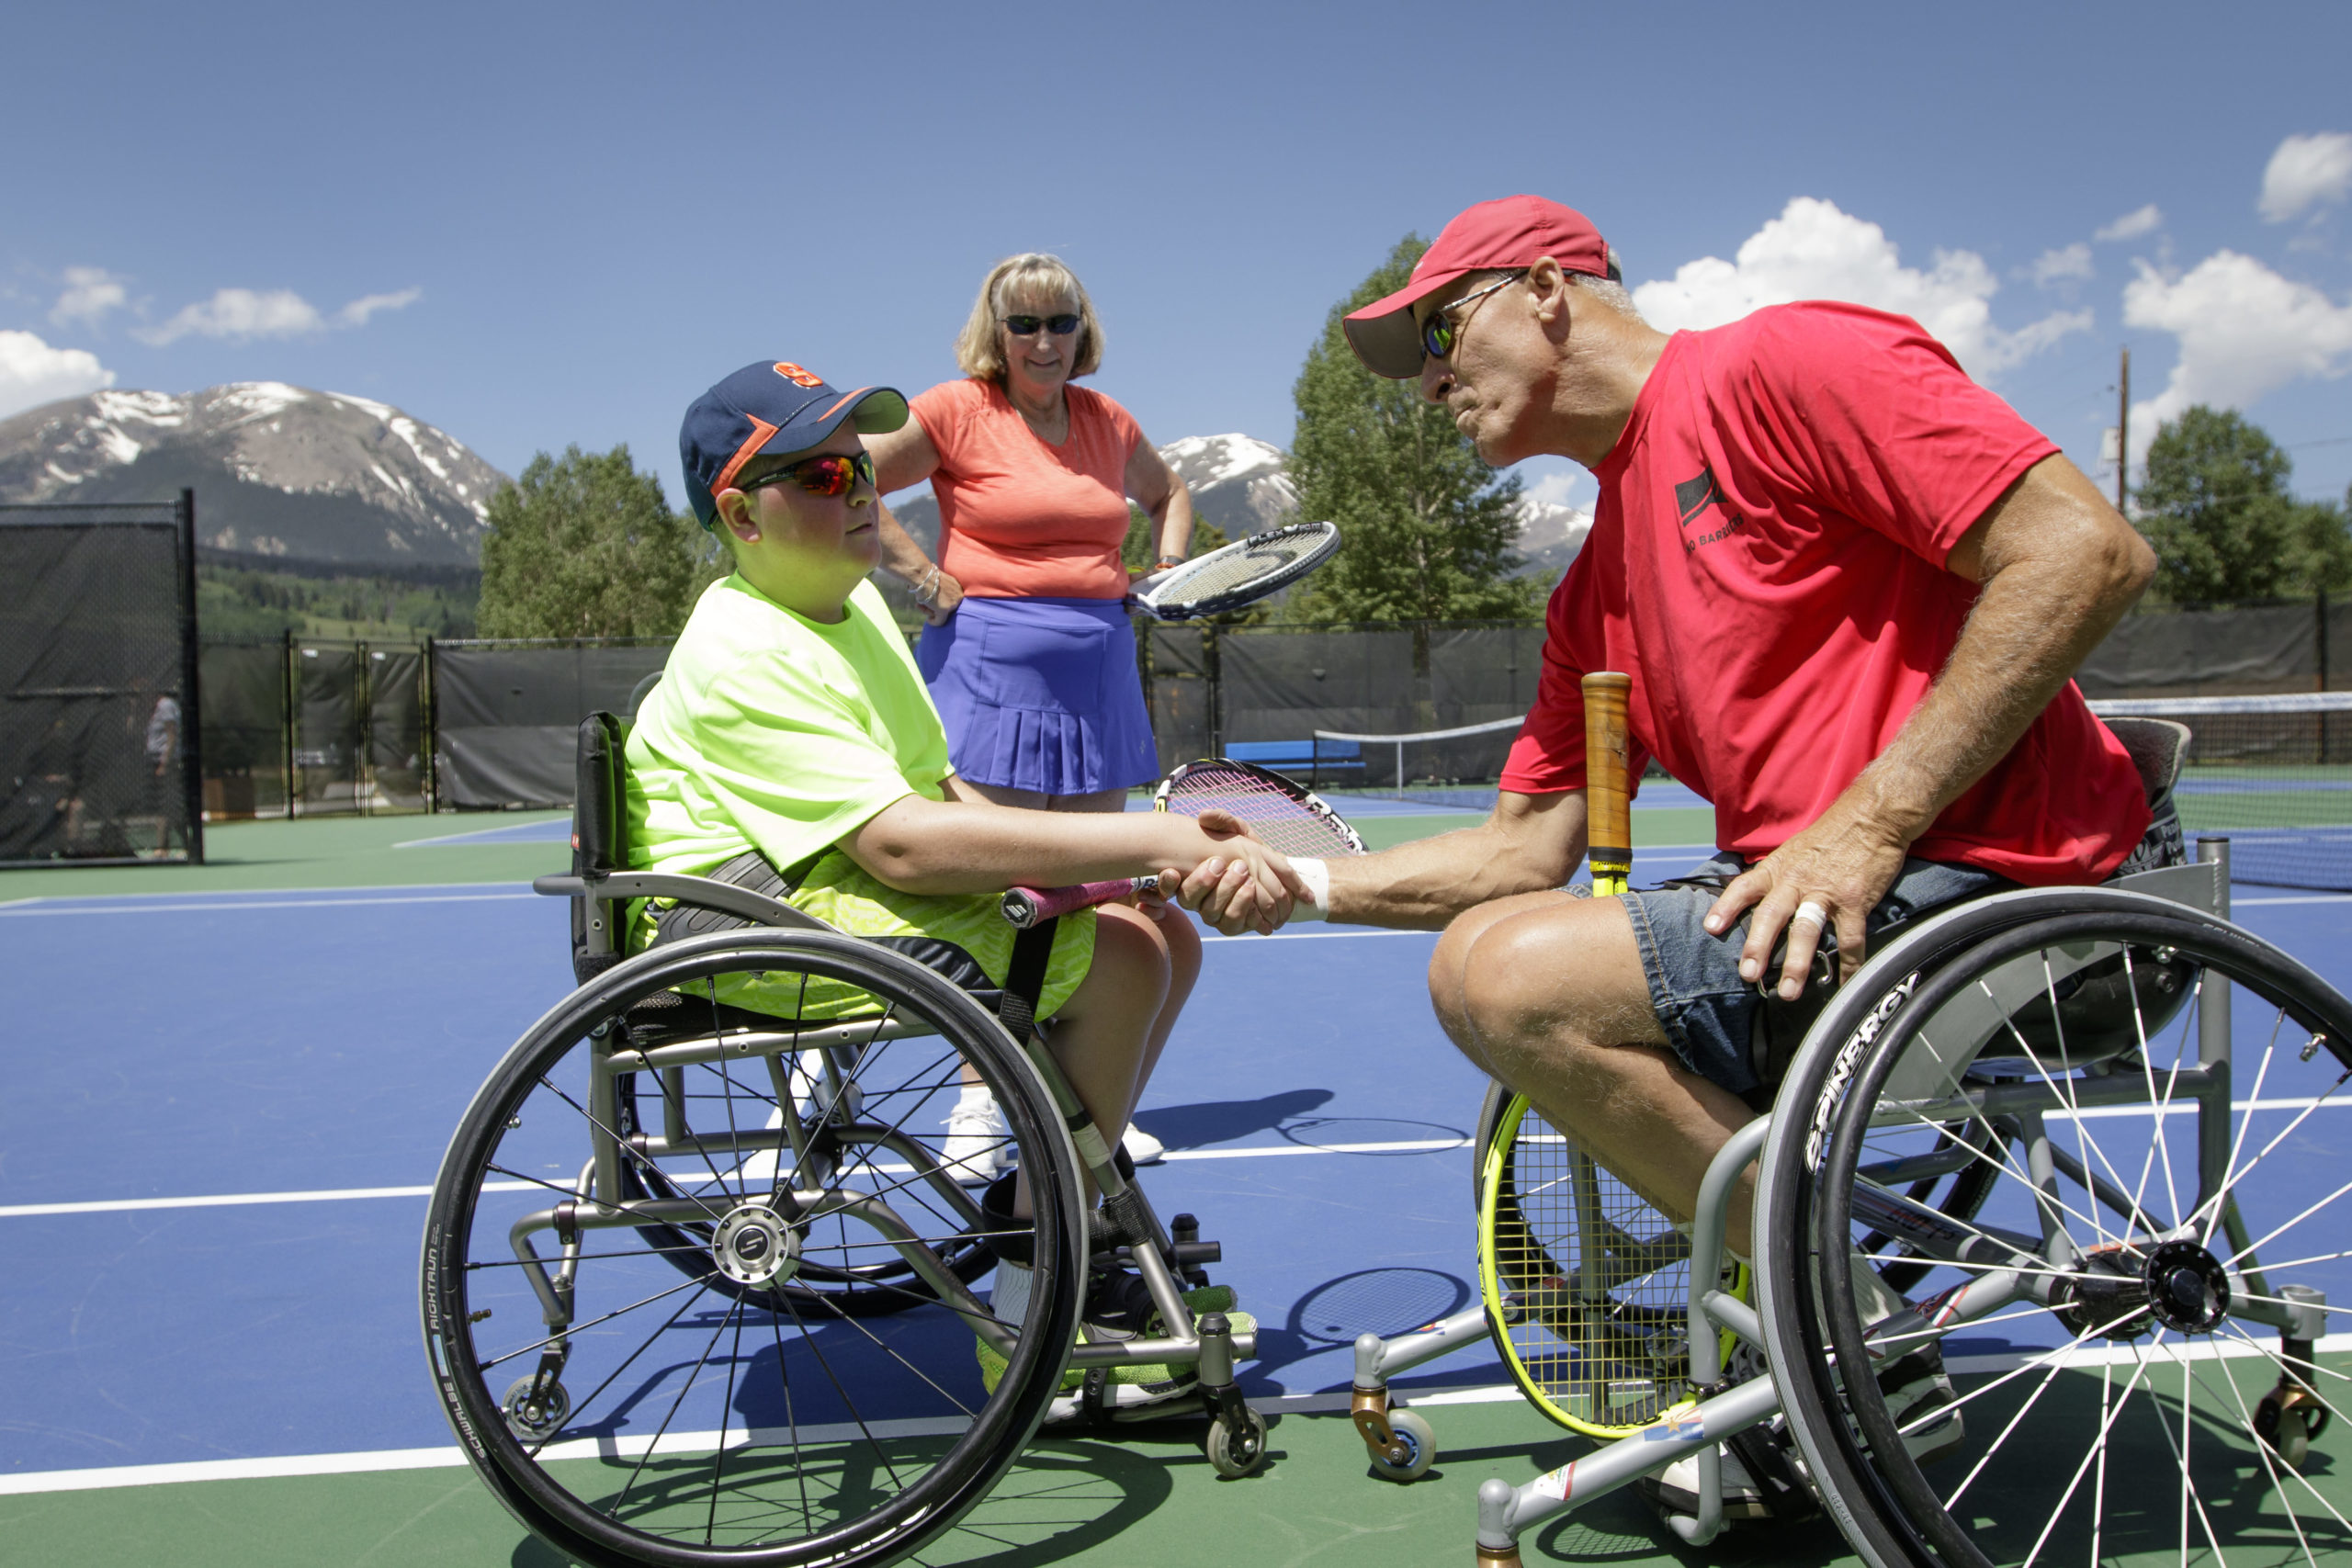 Two athletes in wheelchairs shaking hands with woman standing behind them watching